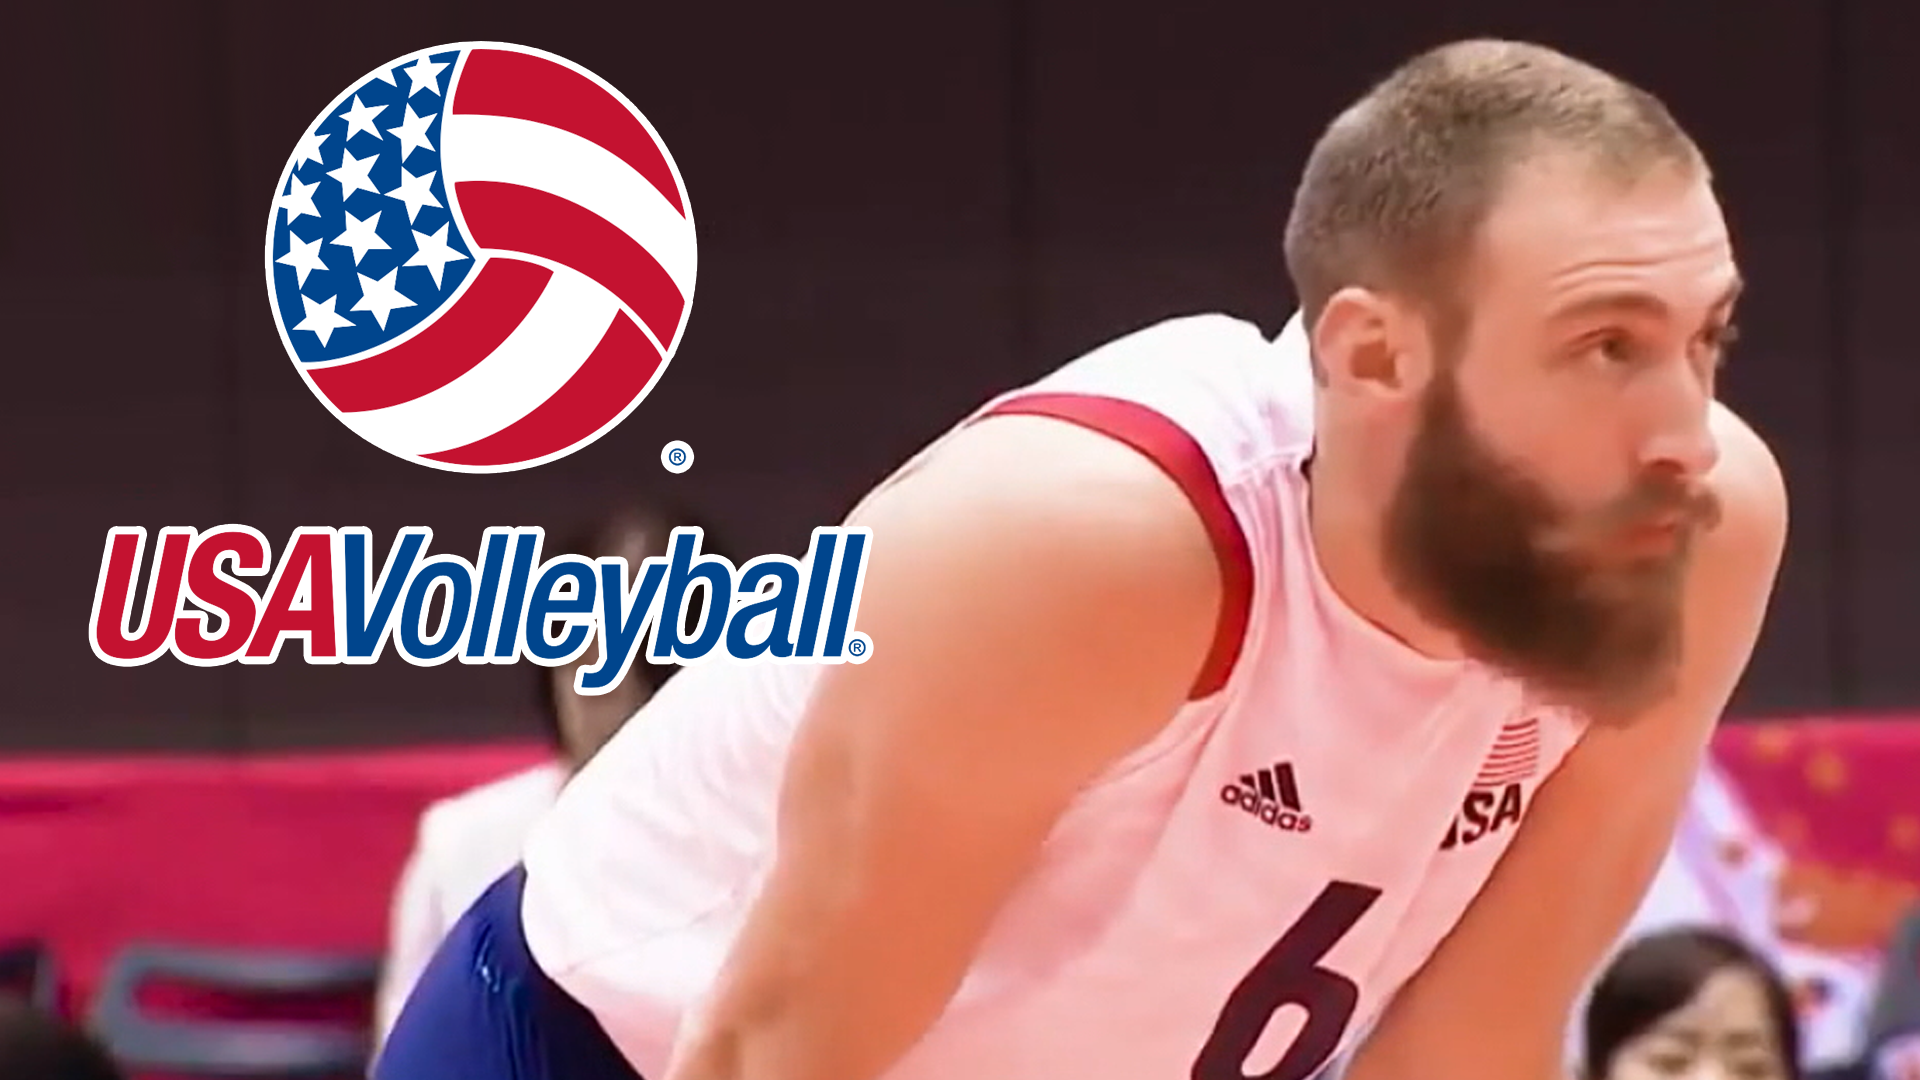 From Chambersburg, to UCLA, to the USA Olympic Men's Volleyball team, Stahl realized in high school the game could take him far.